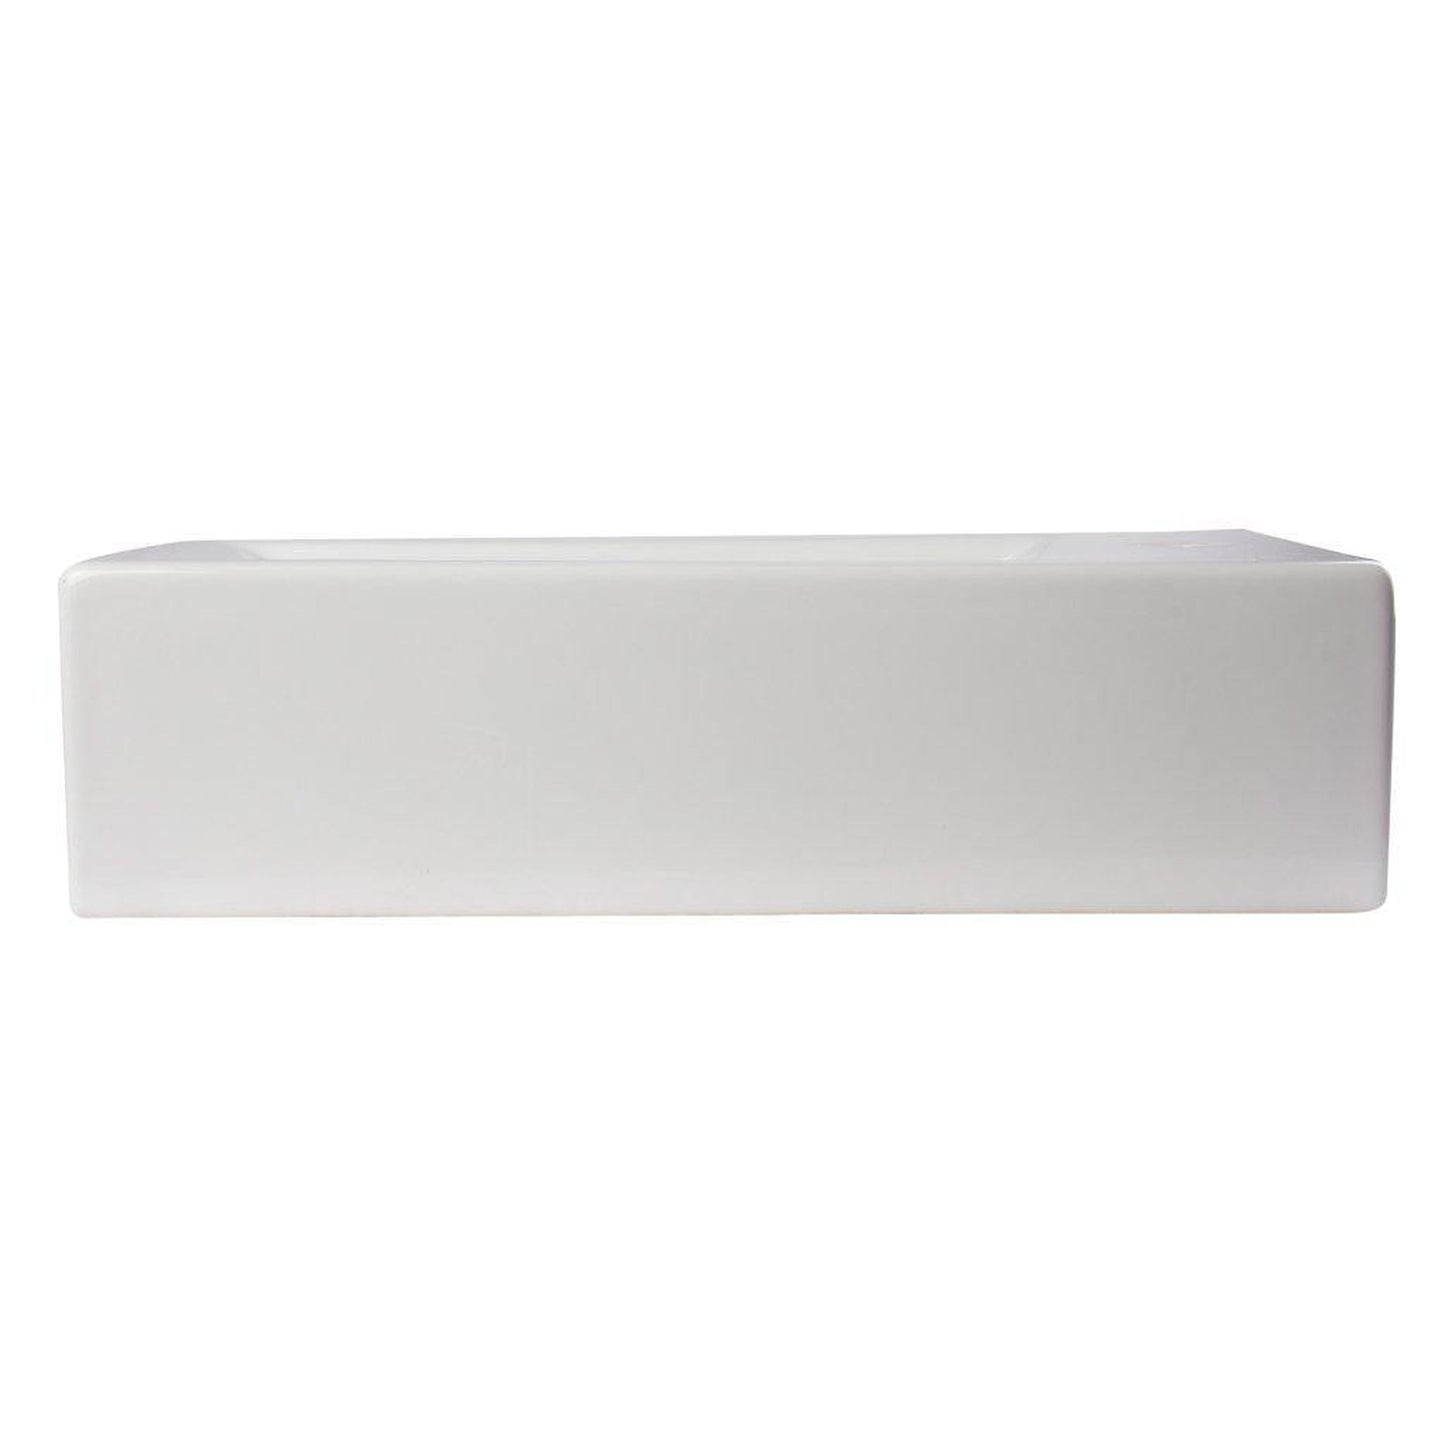 ALFI Brand AB108 20" White Wall-Mounted Rectangle Ceramic Bathroom Sink With Single Faucet Hole